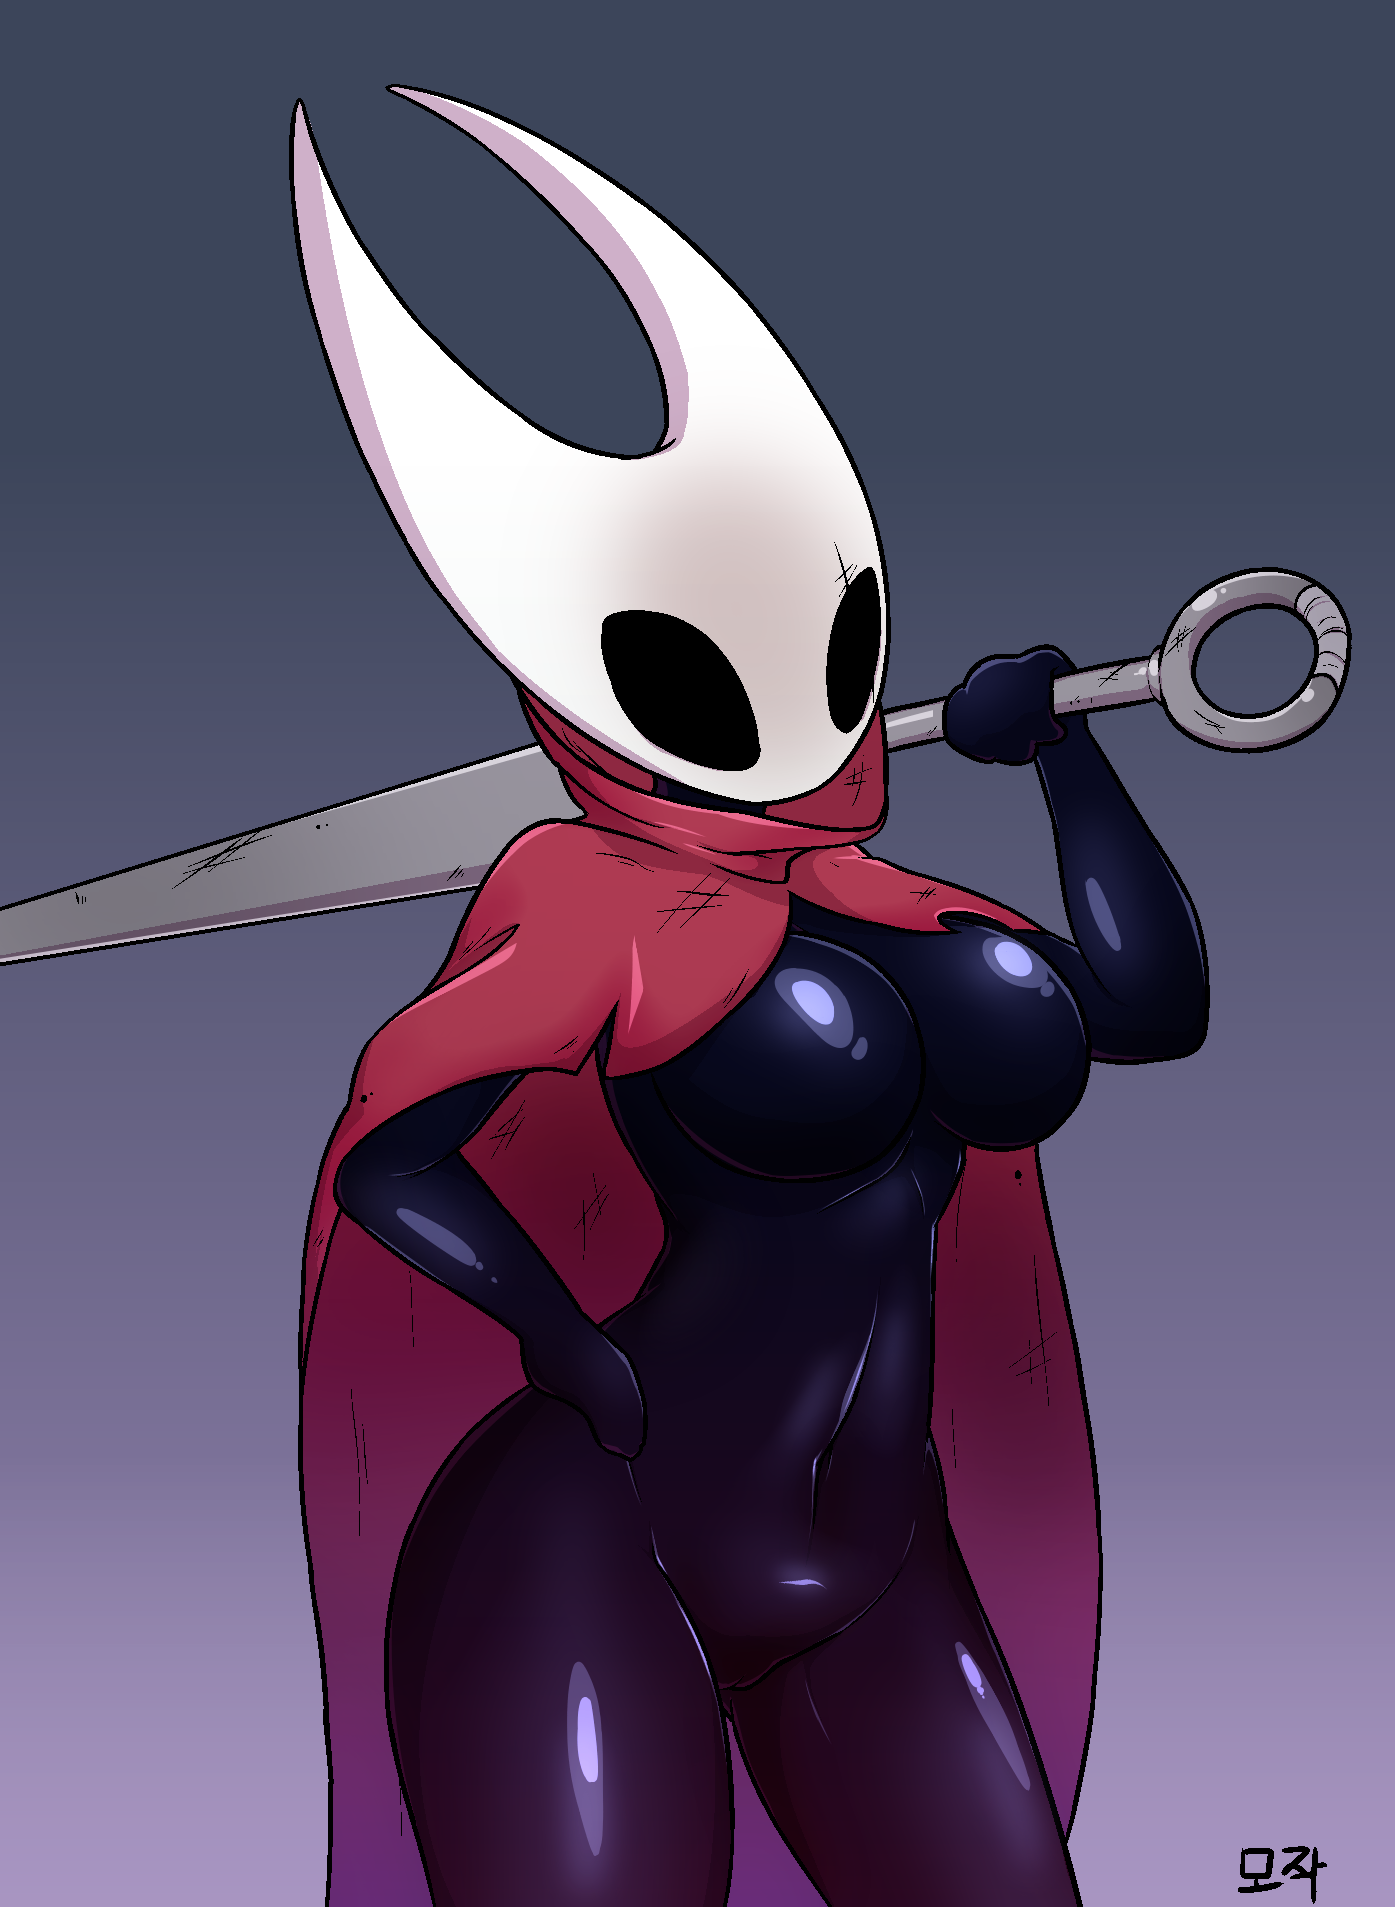 This will bug the hollow knight fans.